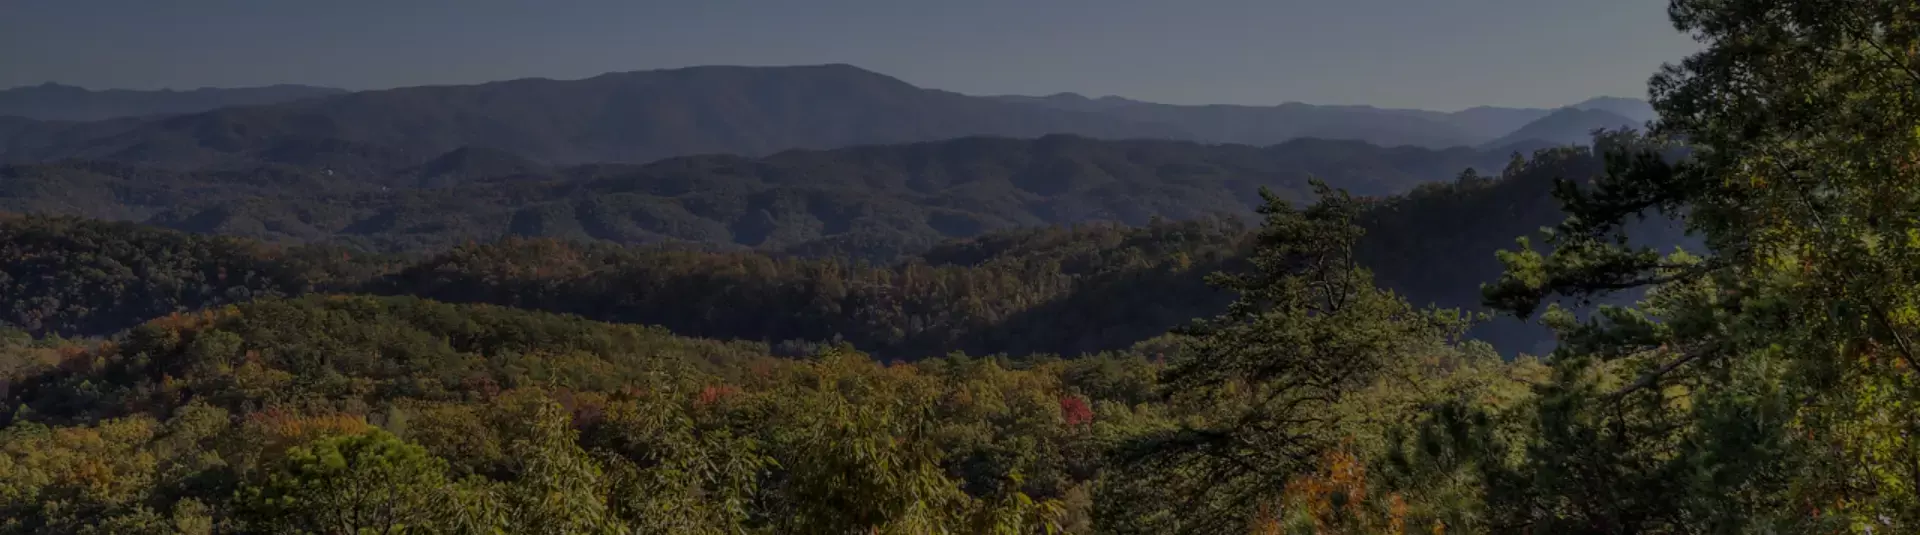 view overlooking Smoky Mountains